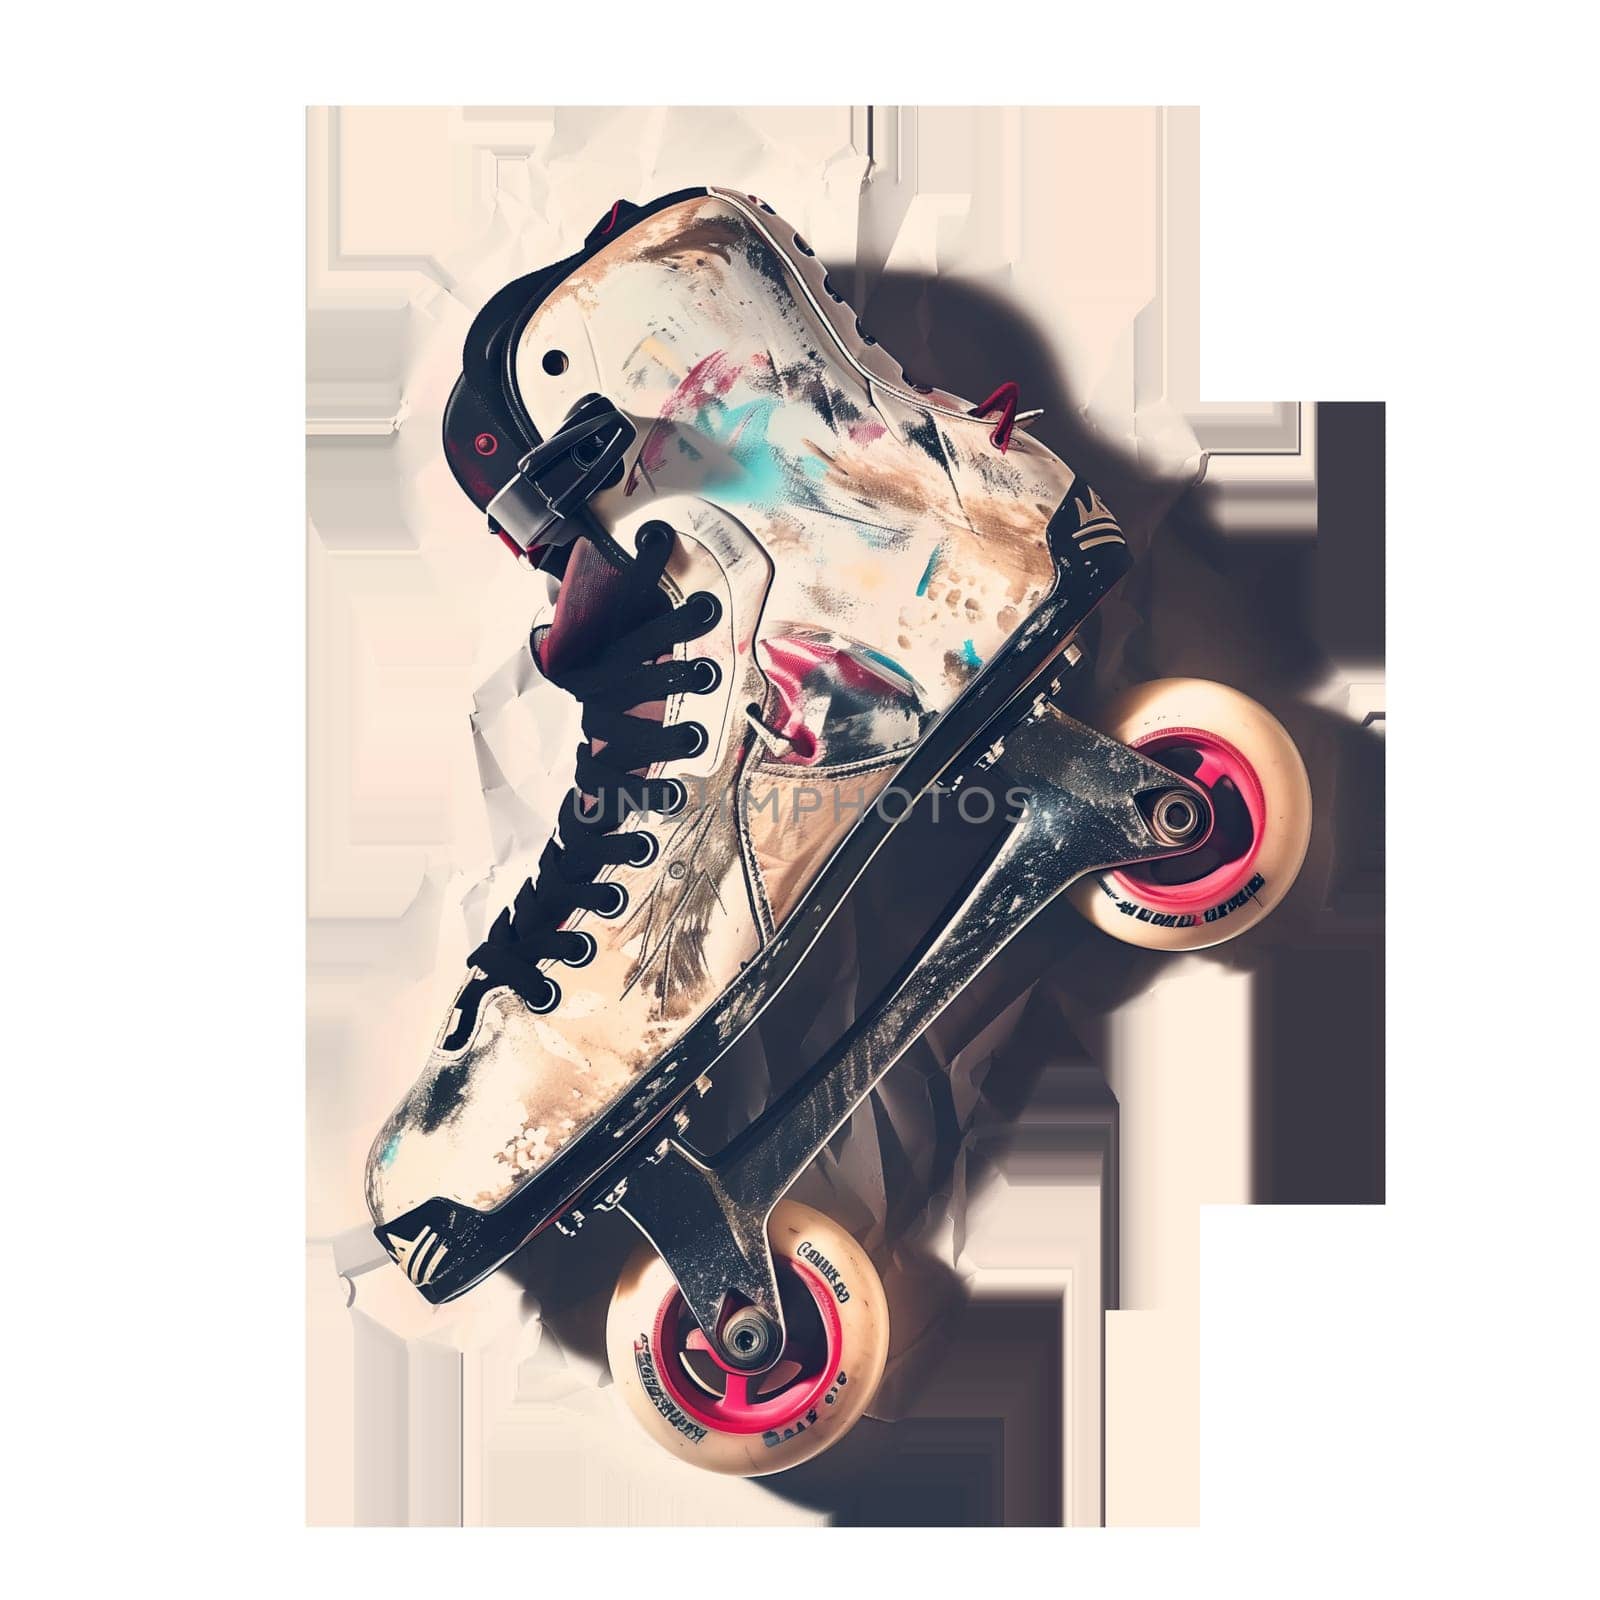 Roller skates cut out image by Dustick